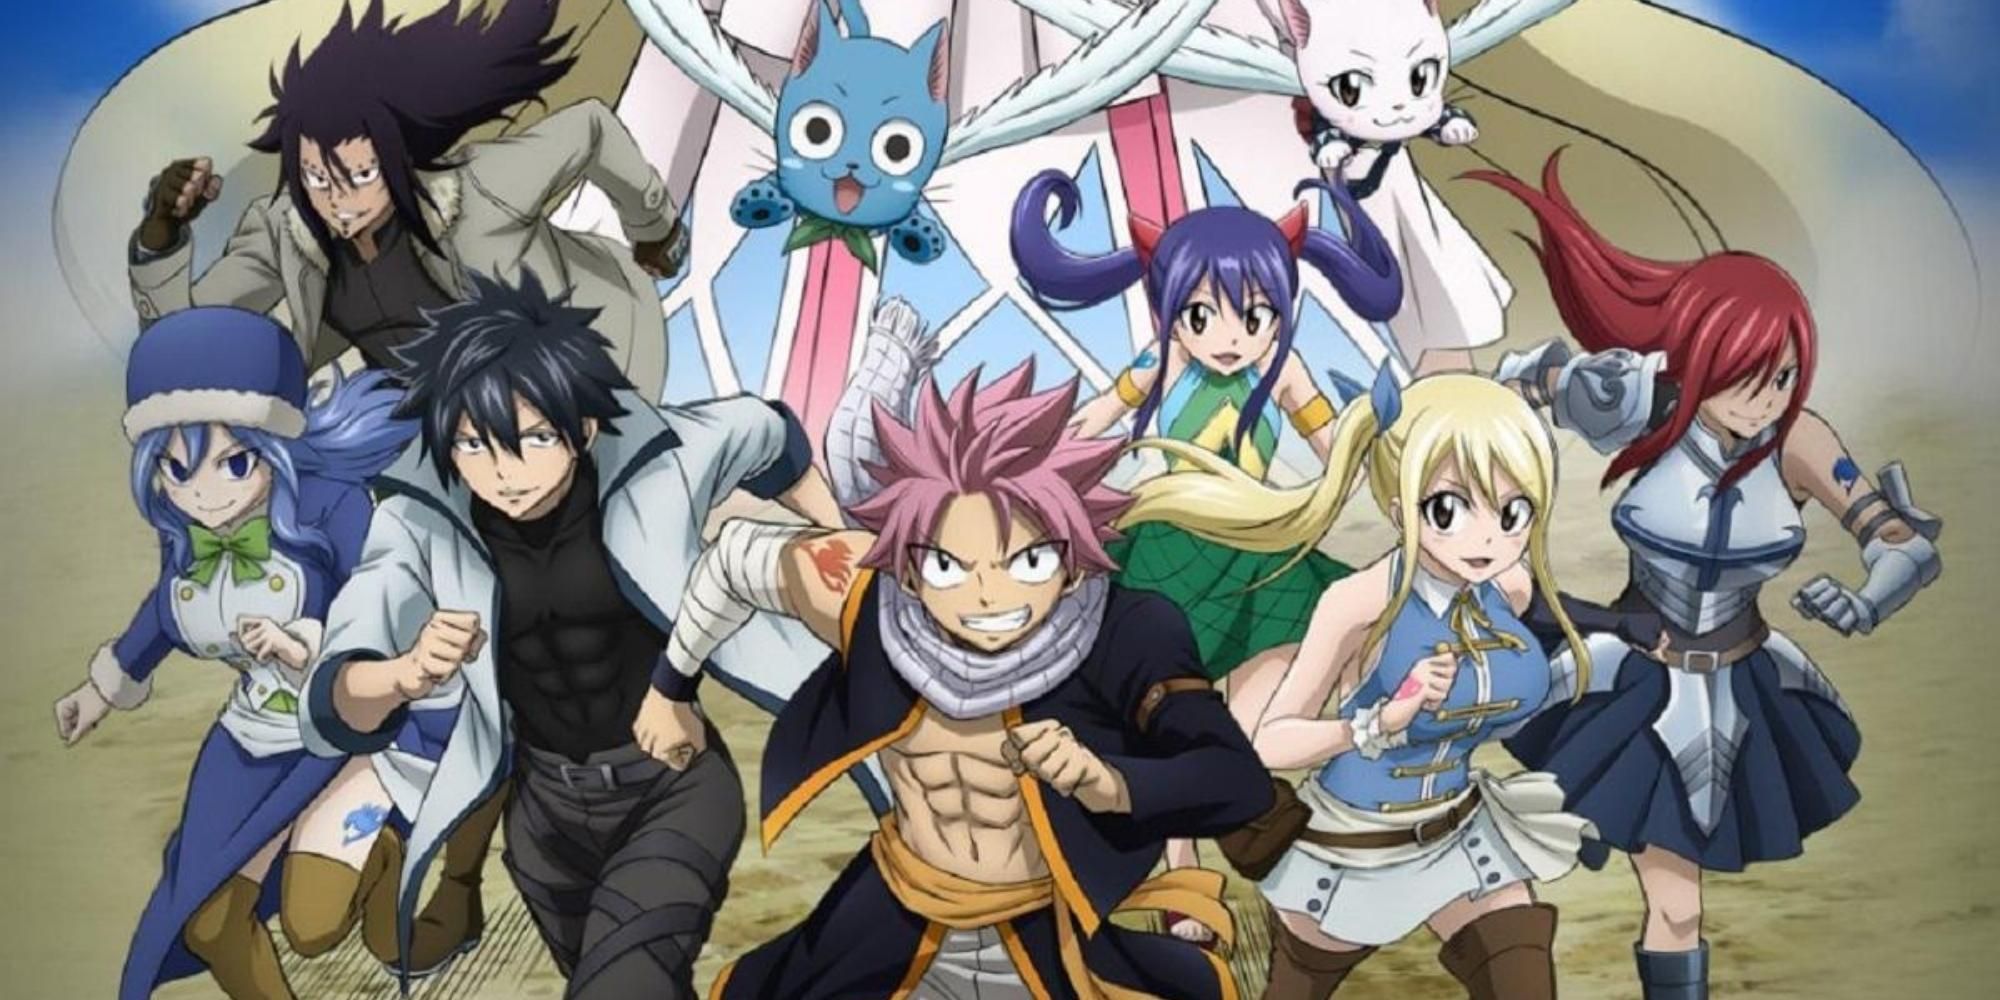 guild members in Fairy Tail